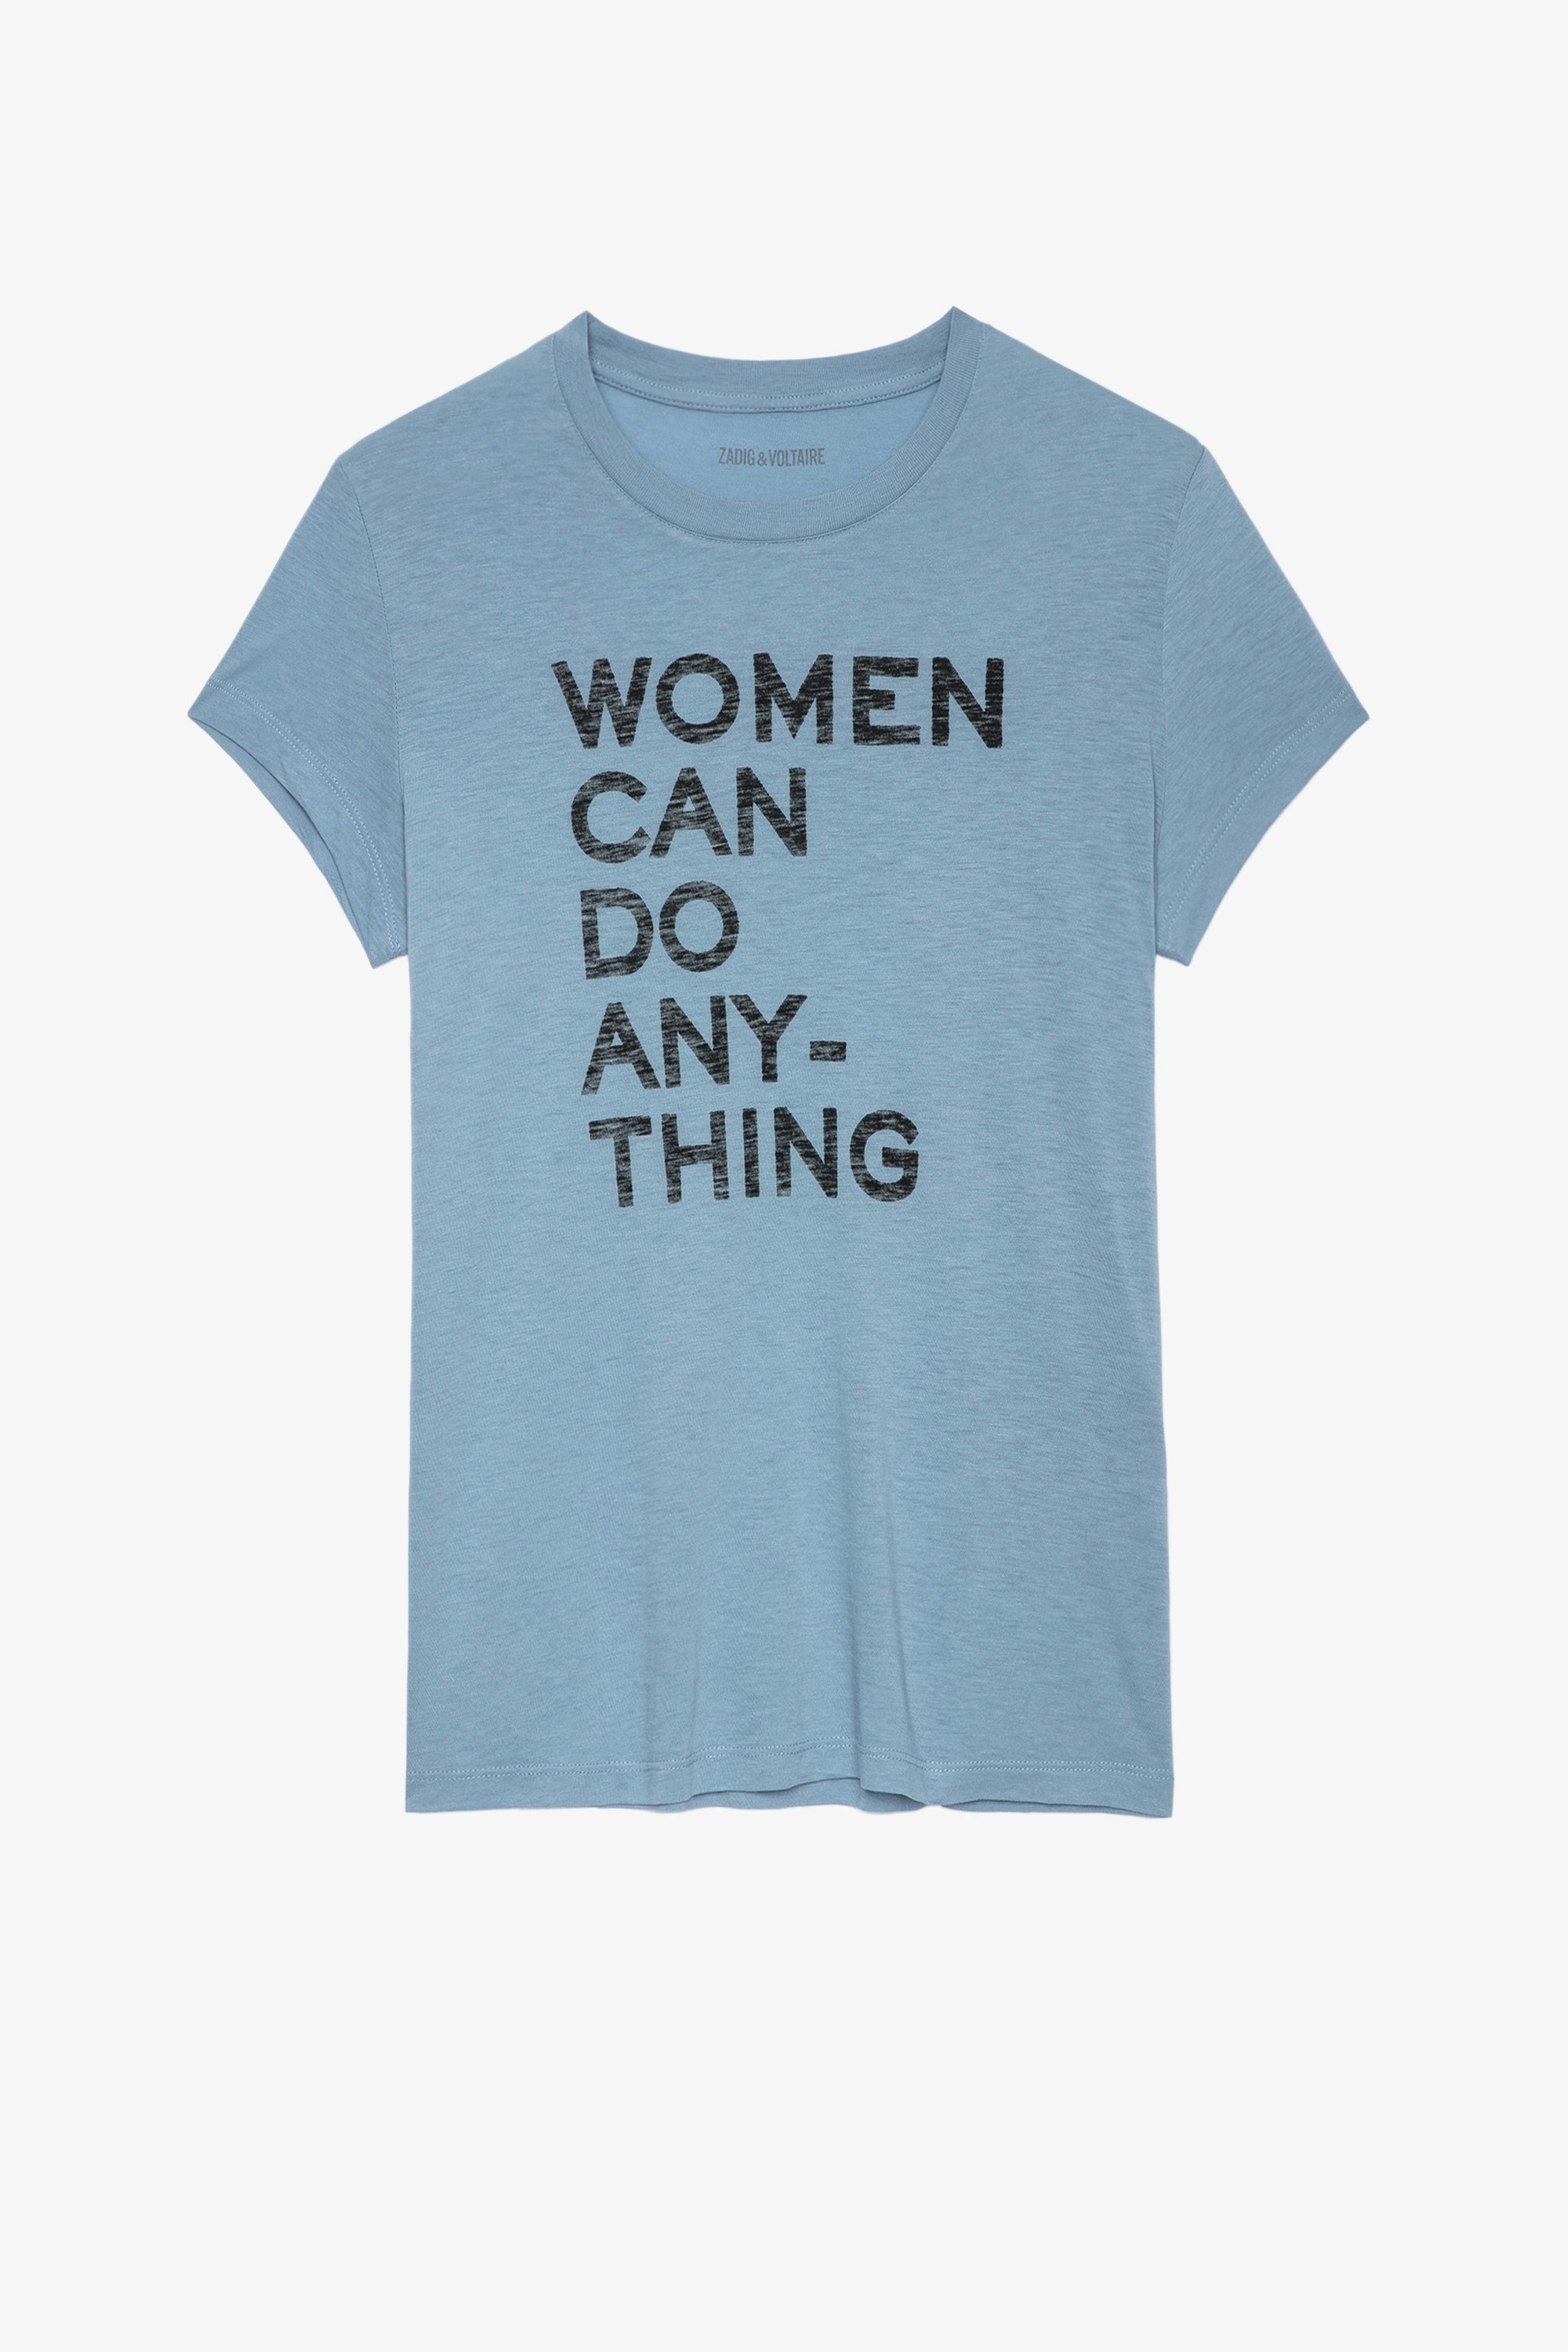 Walk Women can do anything Ｔシャツ Women's blue cotton t-shirt with 'Women can do anything' slogan